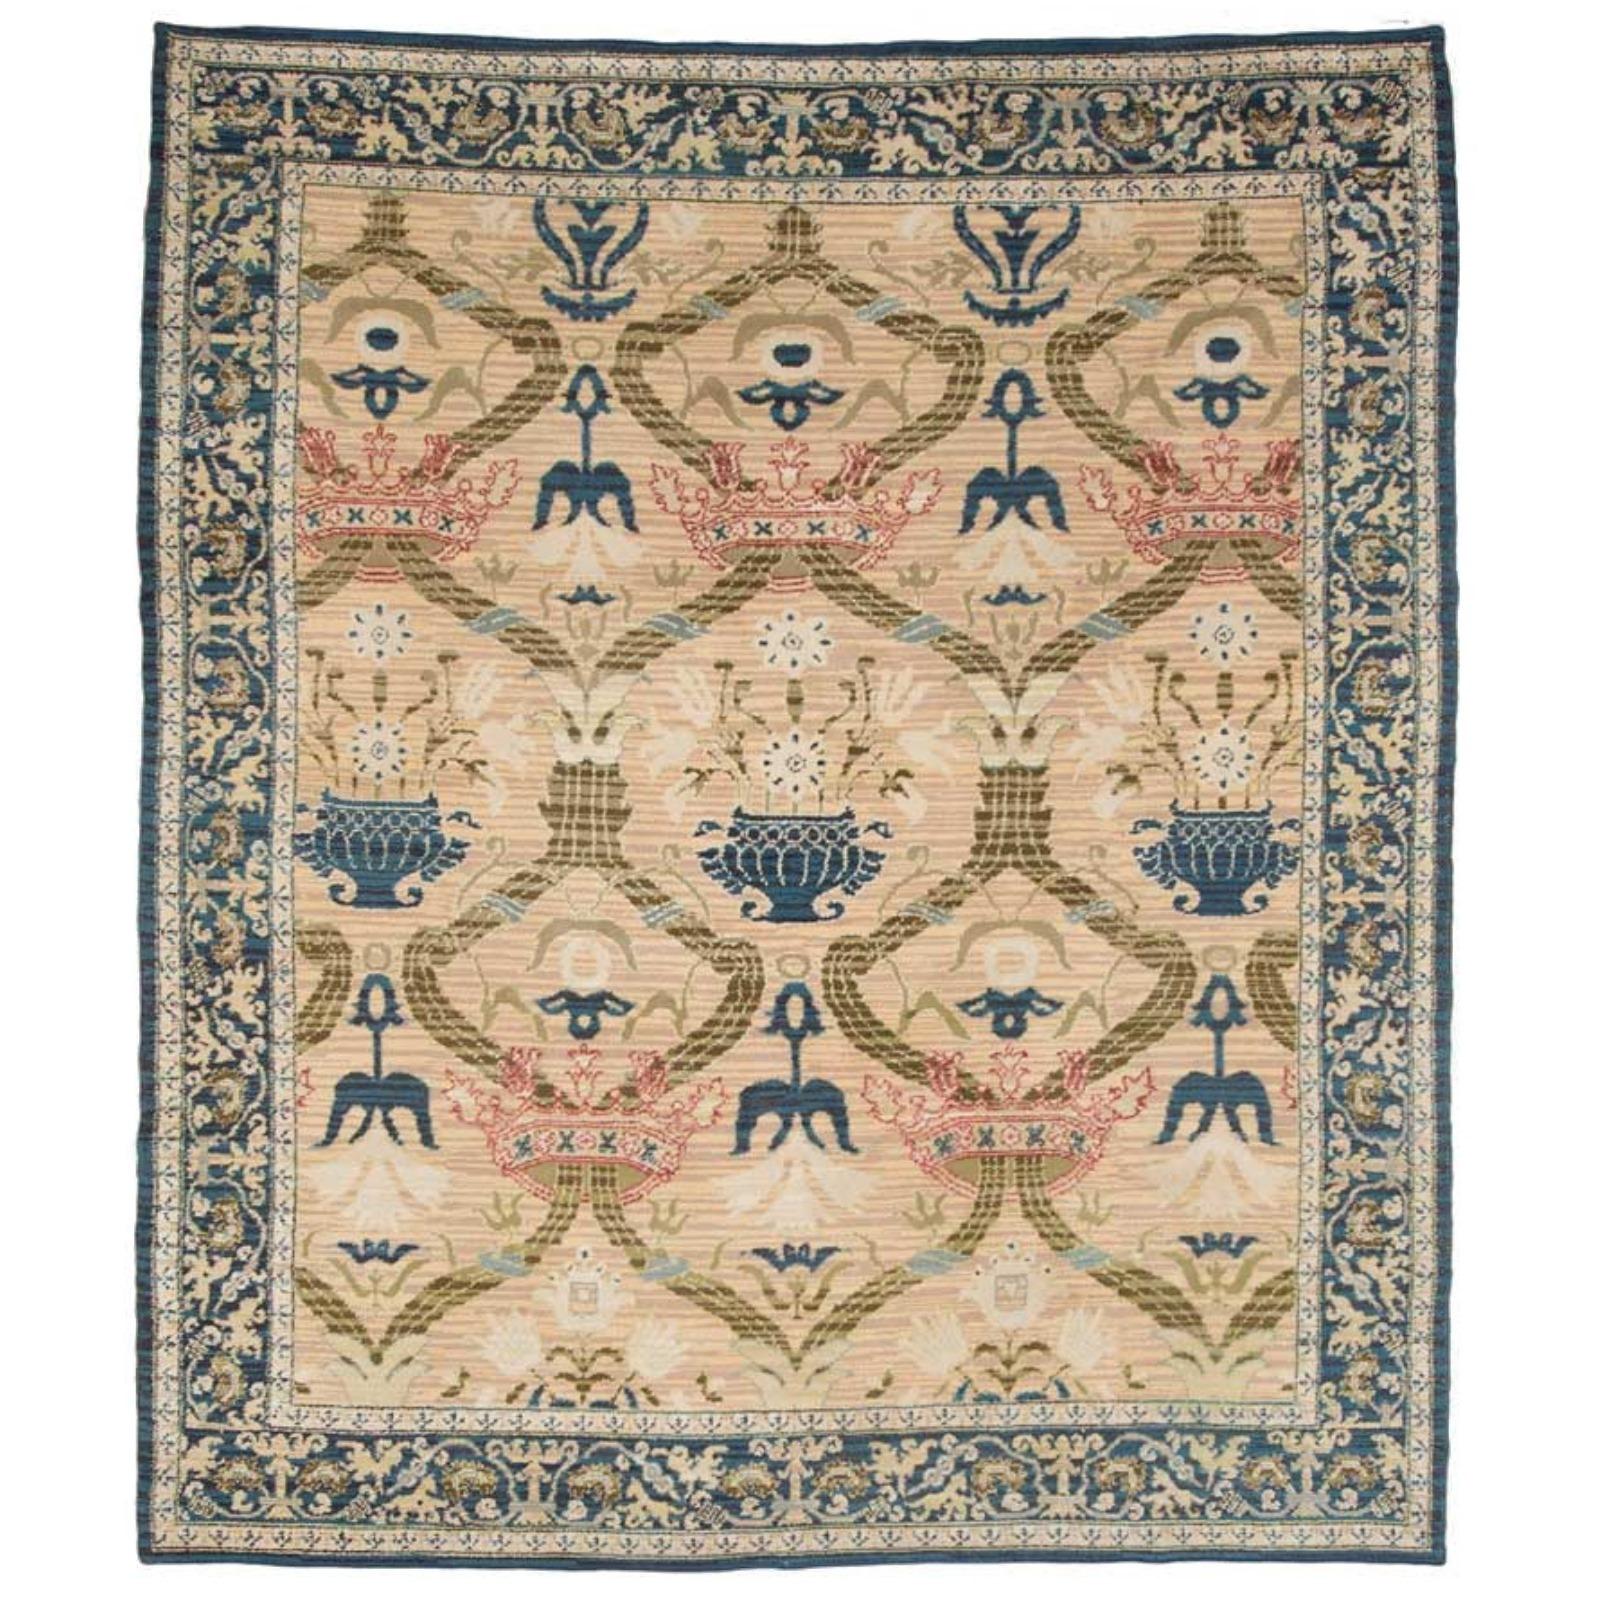 Hand-Knotted Antique Spanish Rug with Crowns